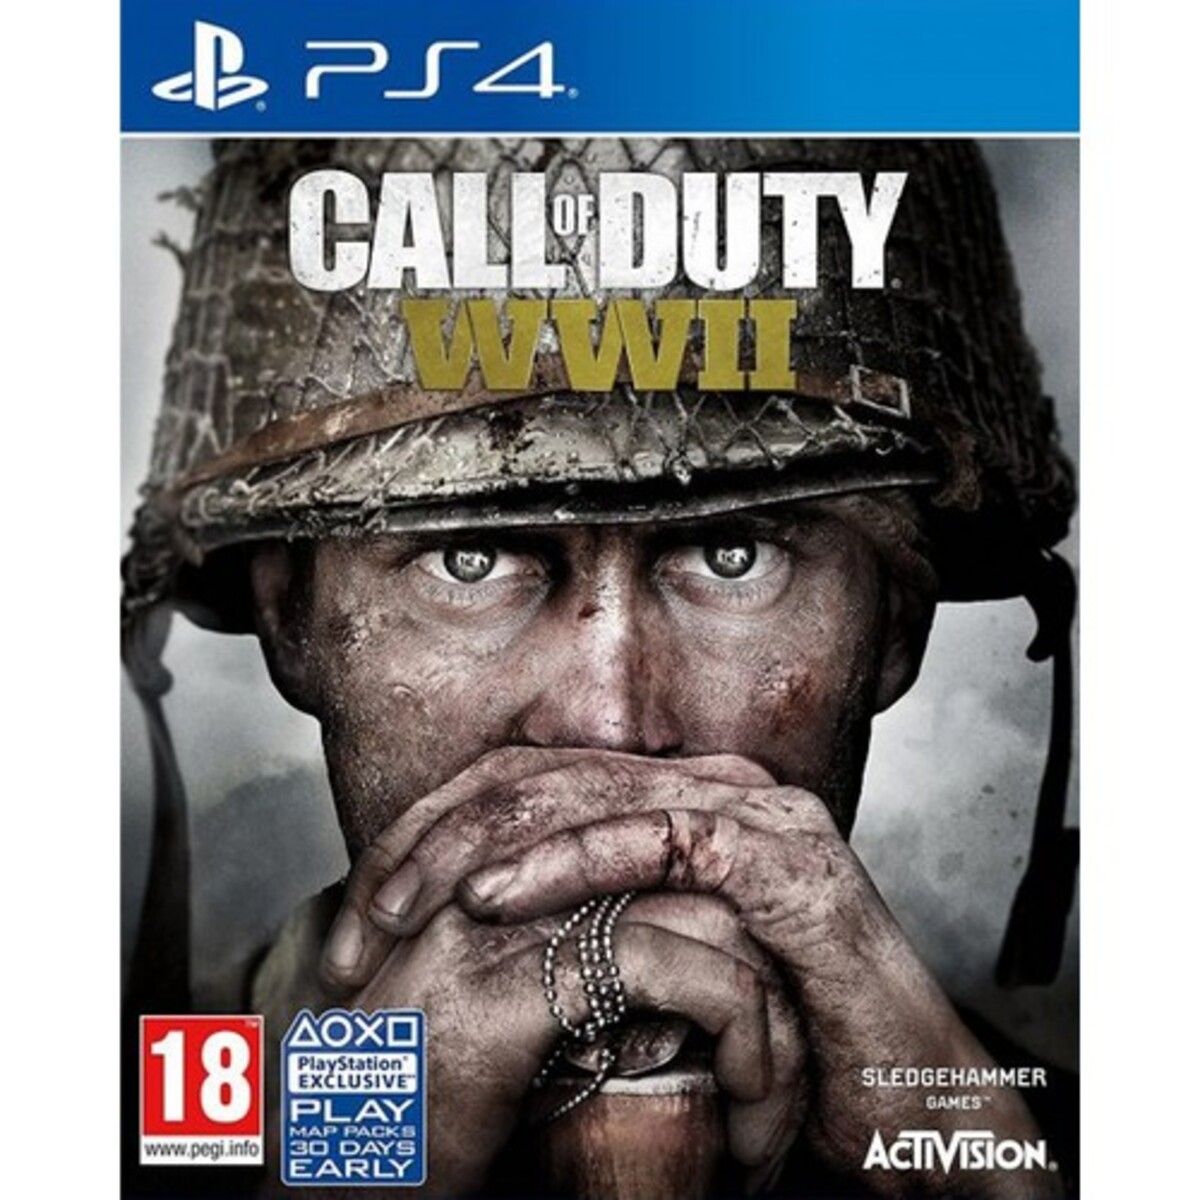 Activision Ps4 Call Of Duty Wwii